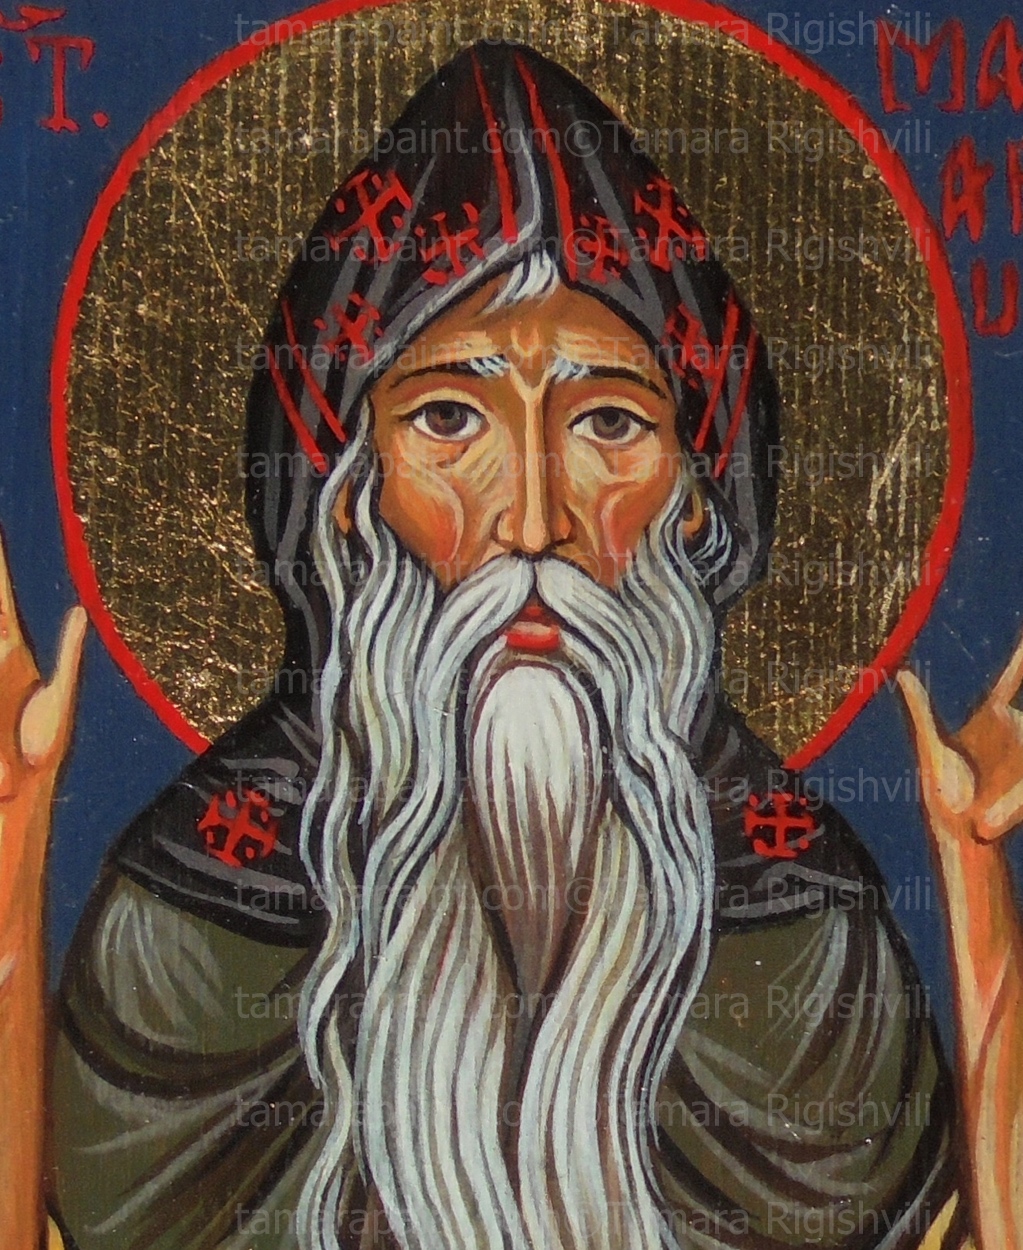 Macarius the Egyptian 300 - 390 ce, Upper Egypt, died  Scete Desert, Egypt; feast day January 15 monk and ascetic who, as one of the Desert Fathers, advanced the ideal of monasticism in Egypt and influenced its development throughout Christendom, Detail, original icon painting by artist Tamara Rigishvili